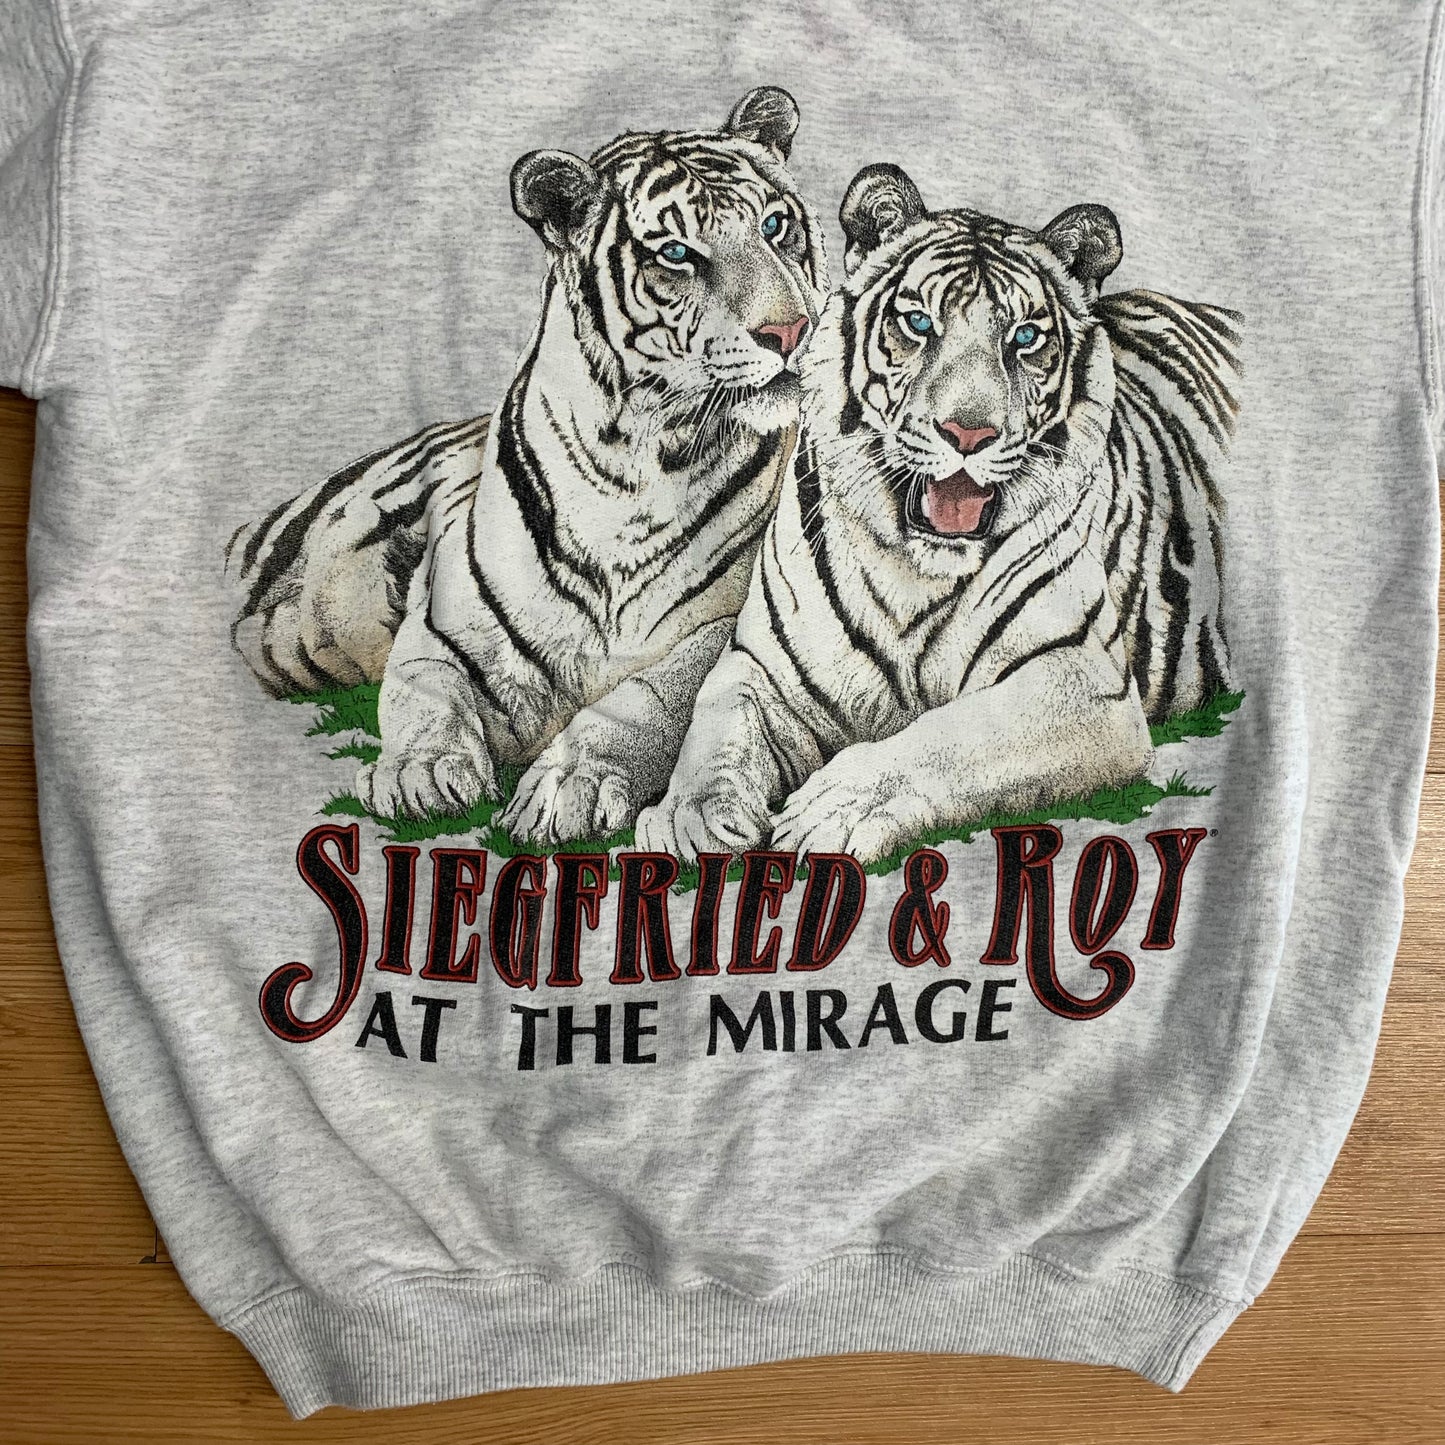 Siegfried and Roy Crew  L